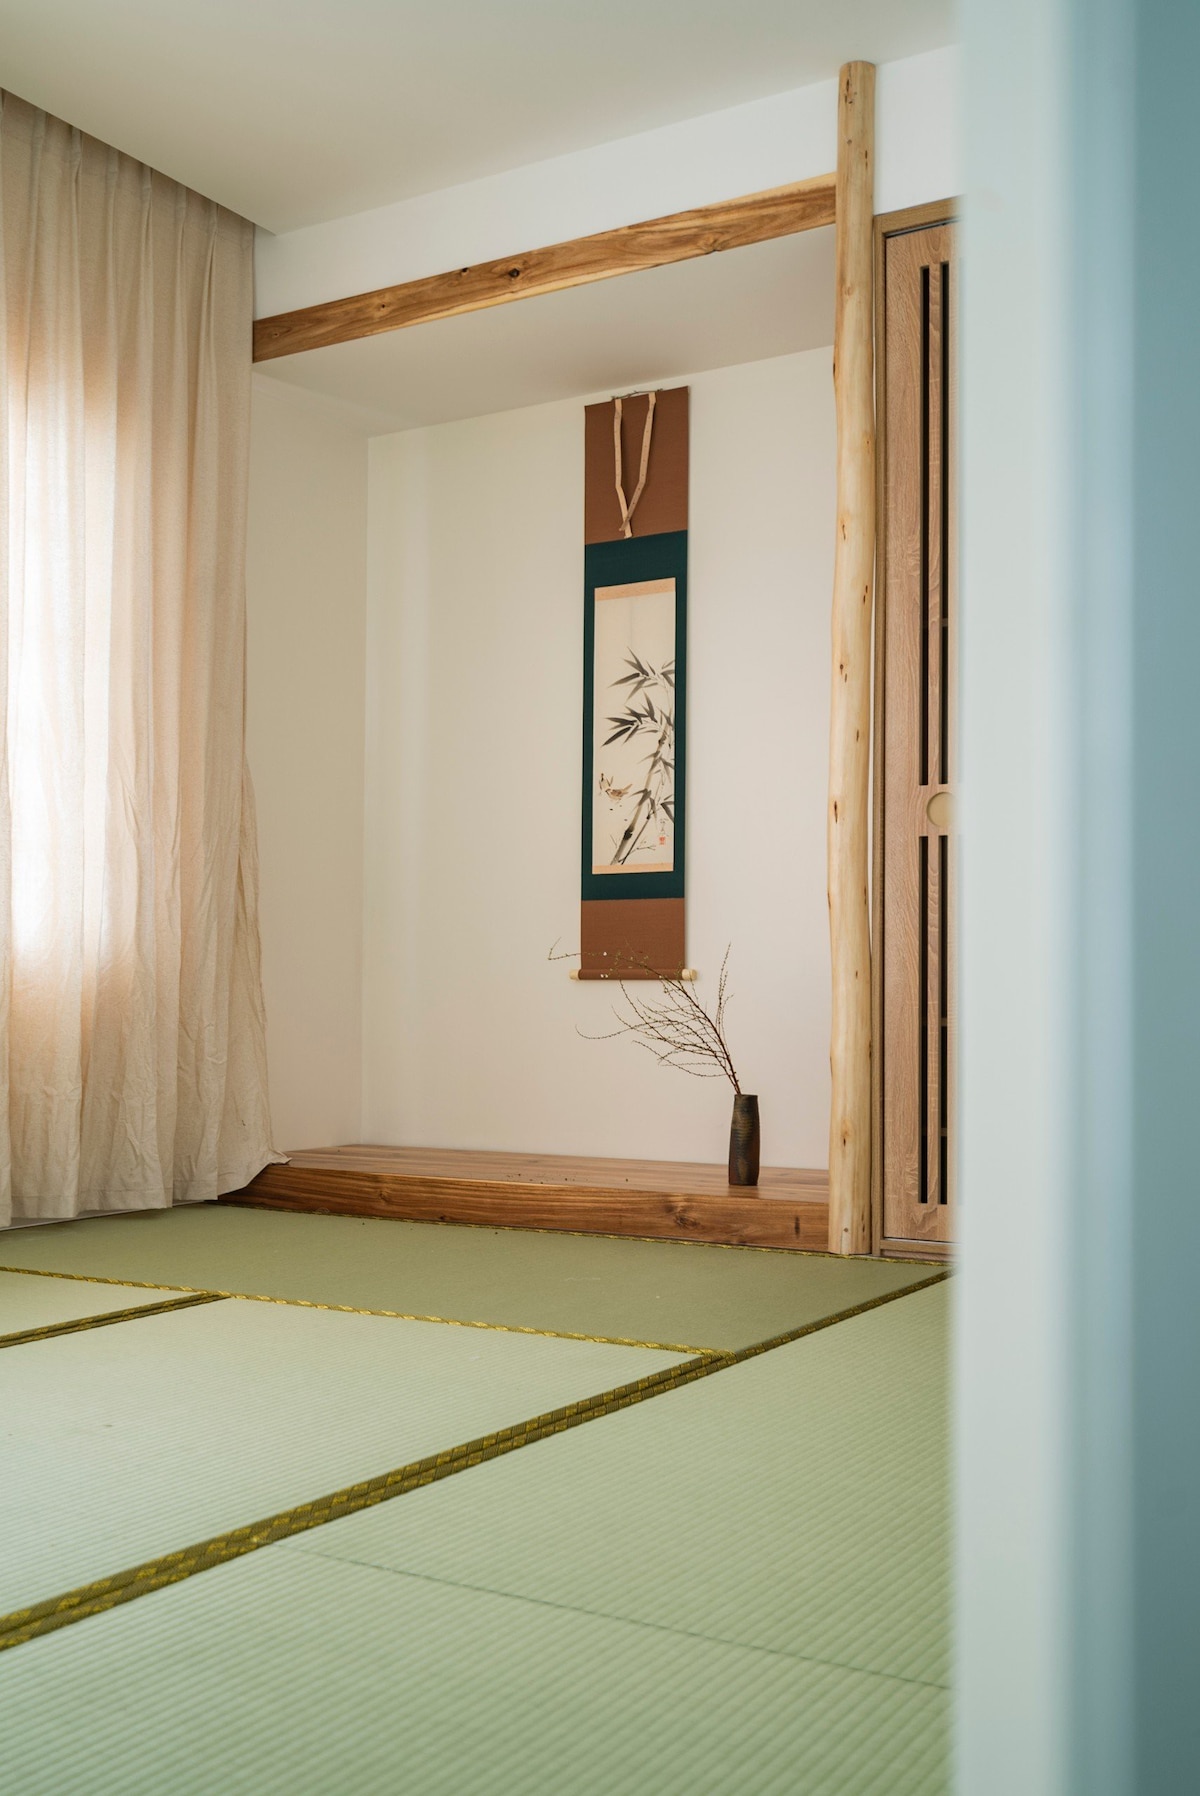 The Japanese Style Room